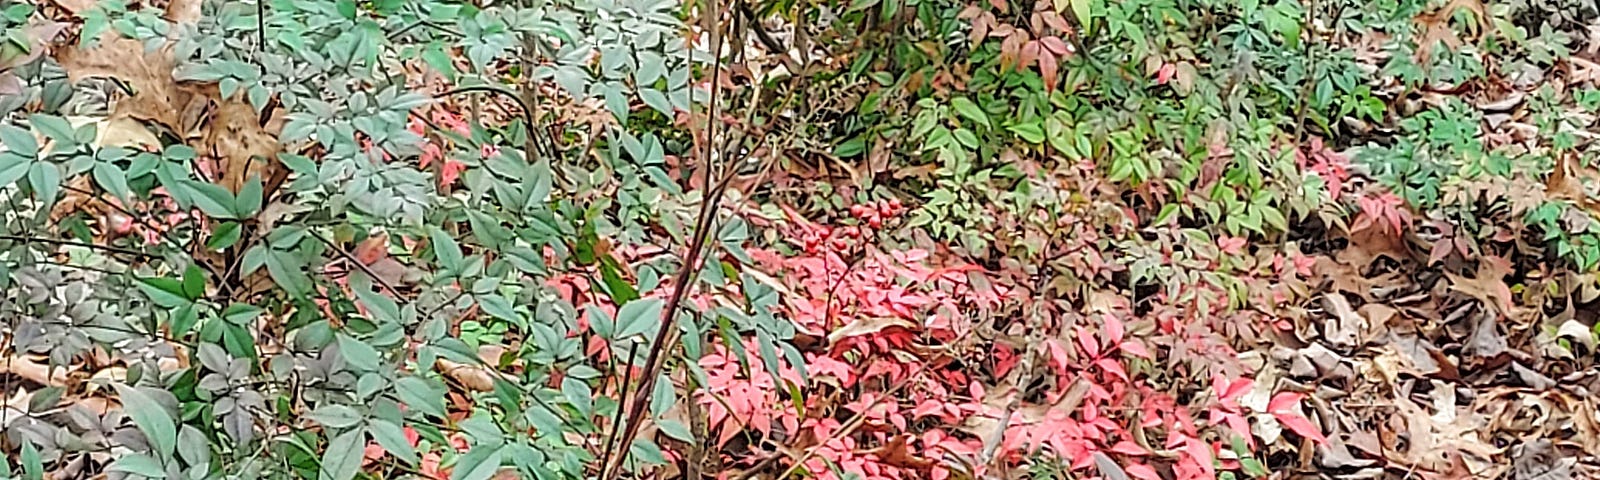 photo of Nandina with winter red berries and leaves, a shrub-like plant that grows like a bamboo